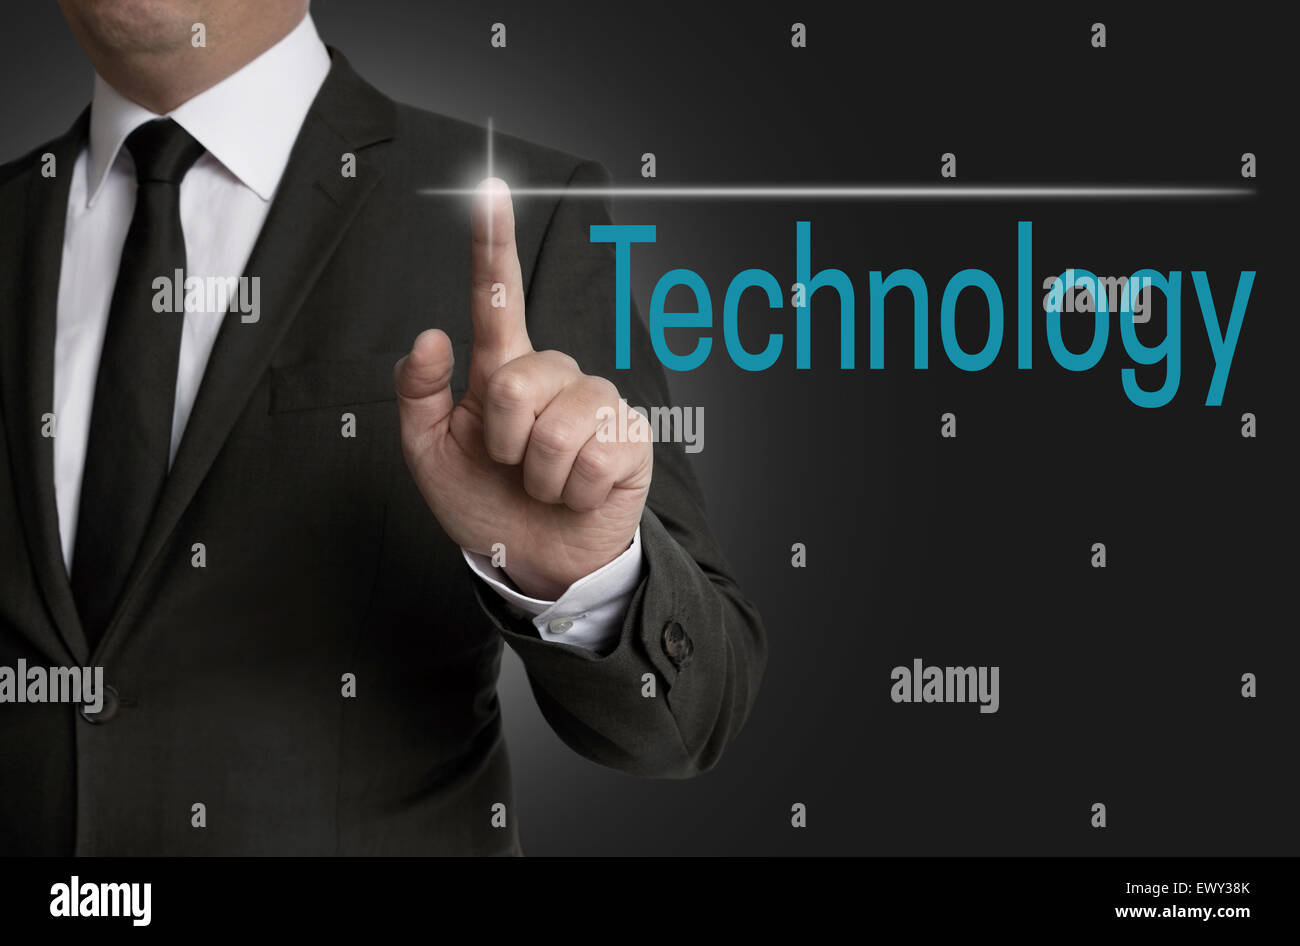 Technology touchscreen is operated by businessman. Stock Photo